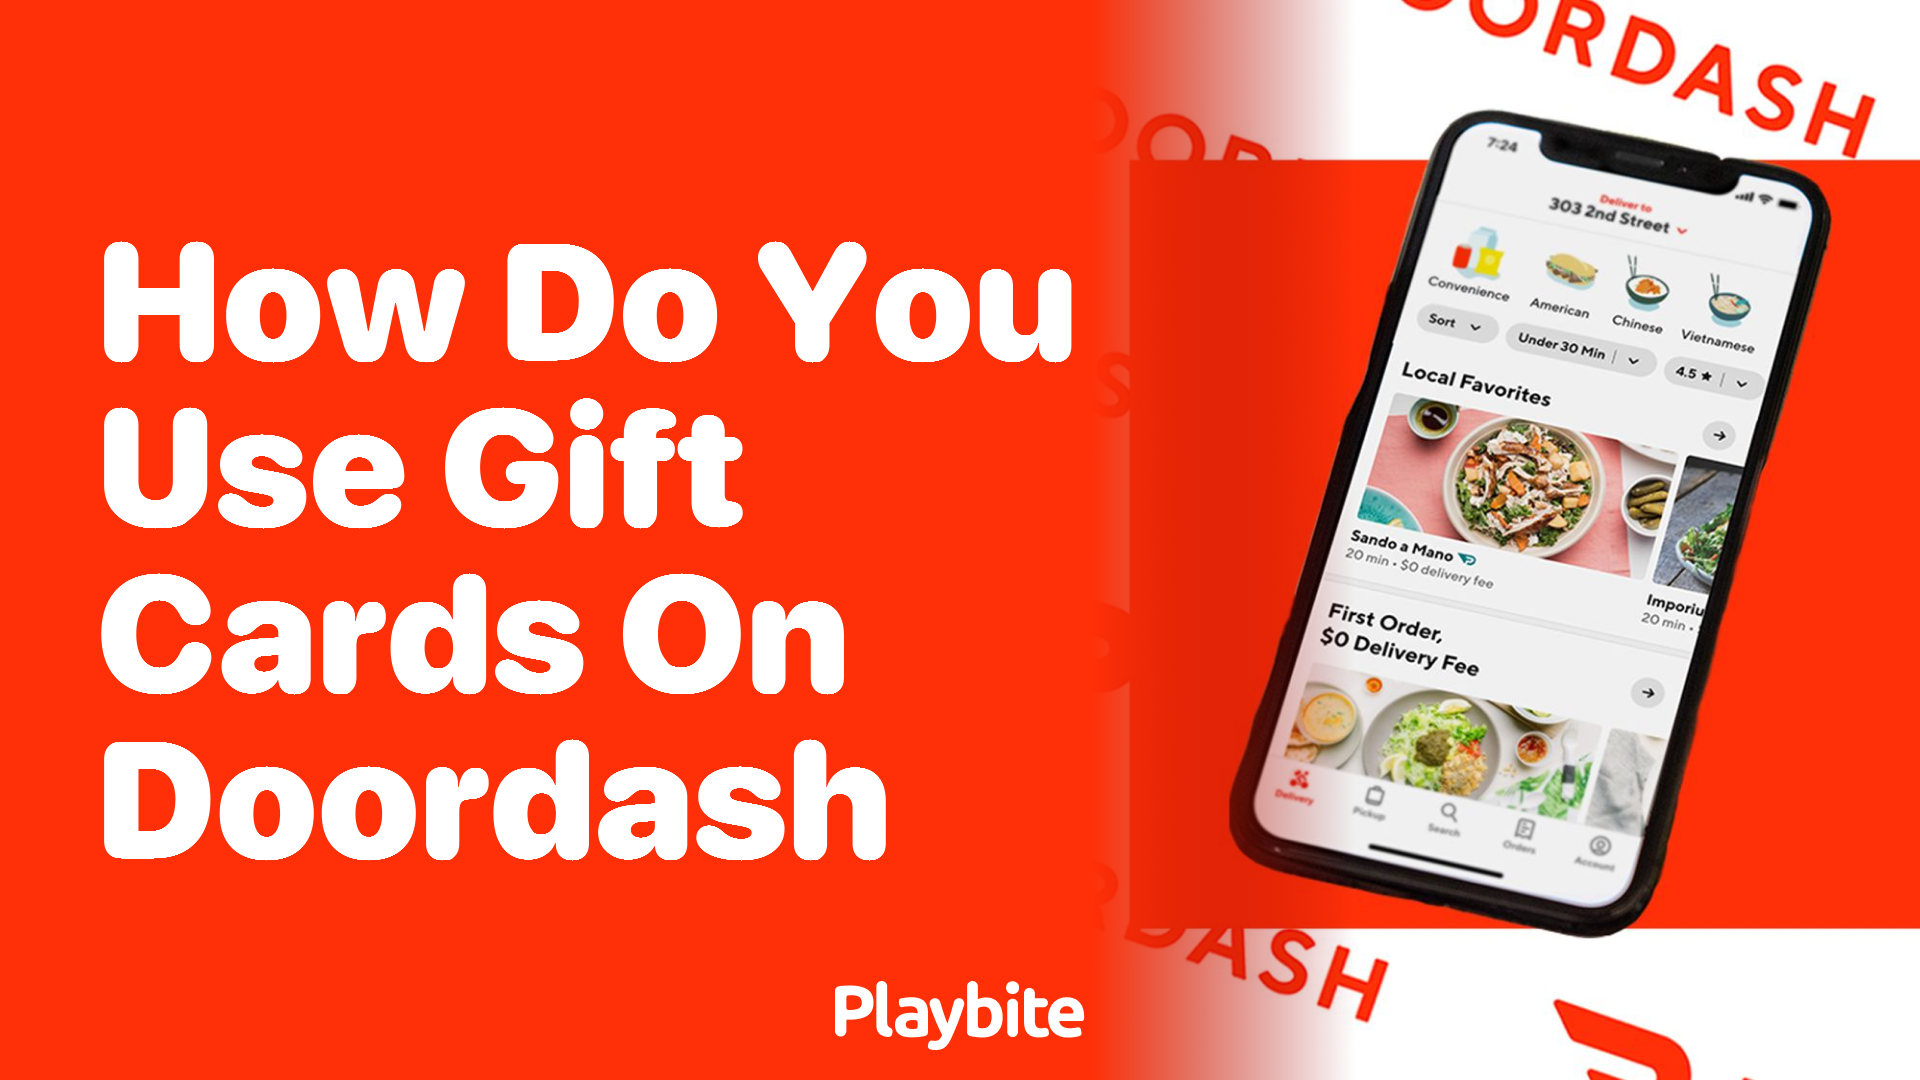 How Do You Use Gift Cards on DoorDash? Quick Guide!